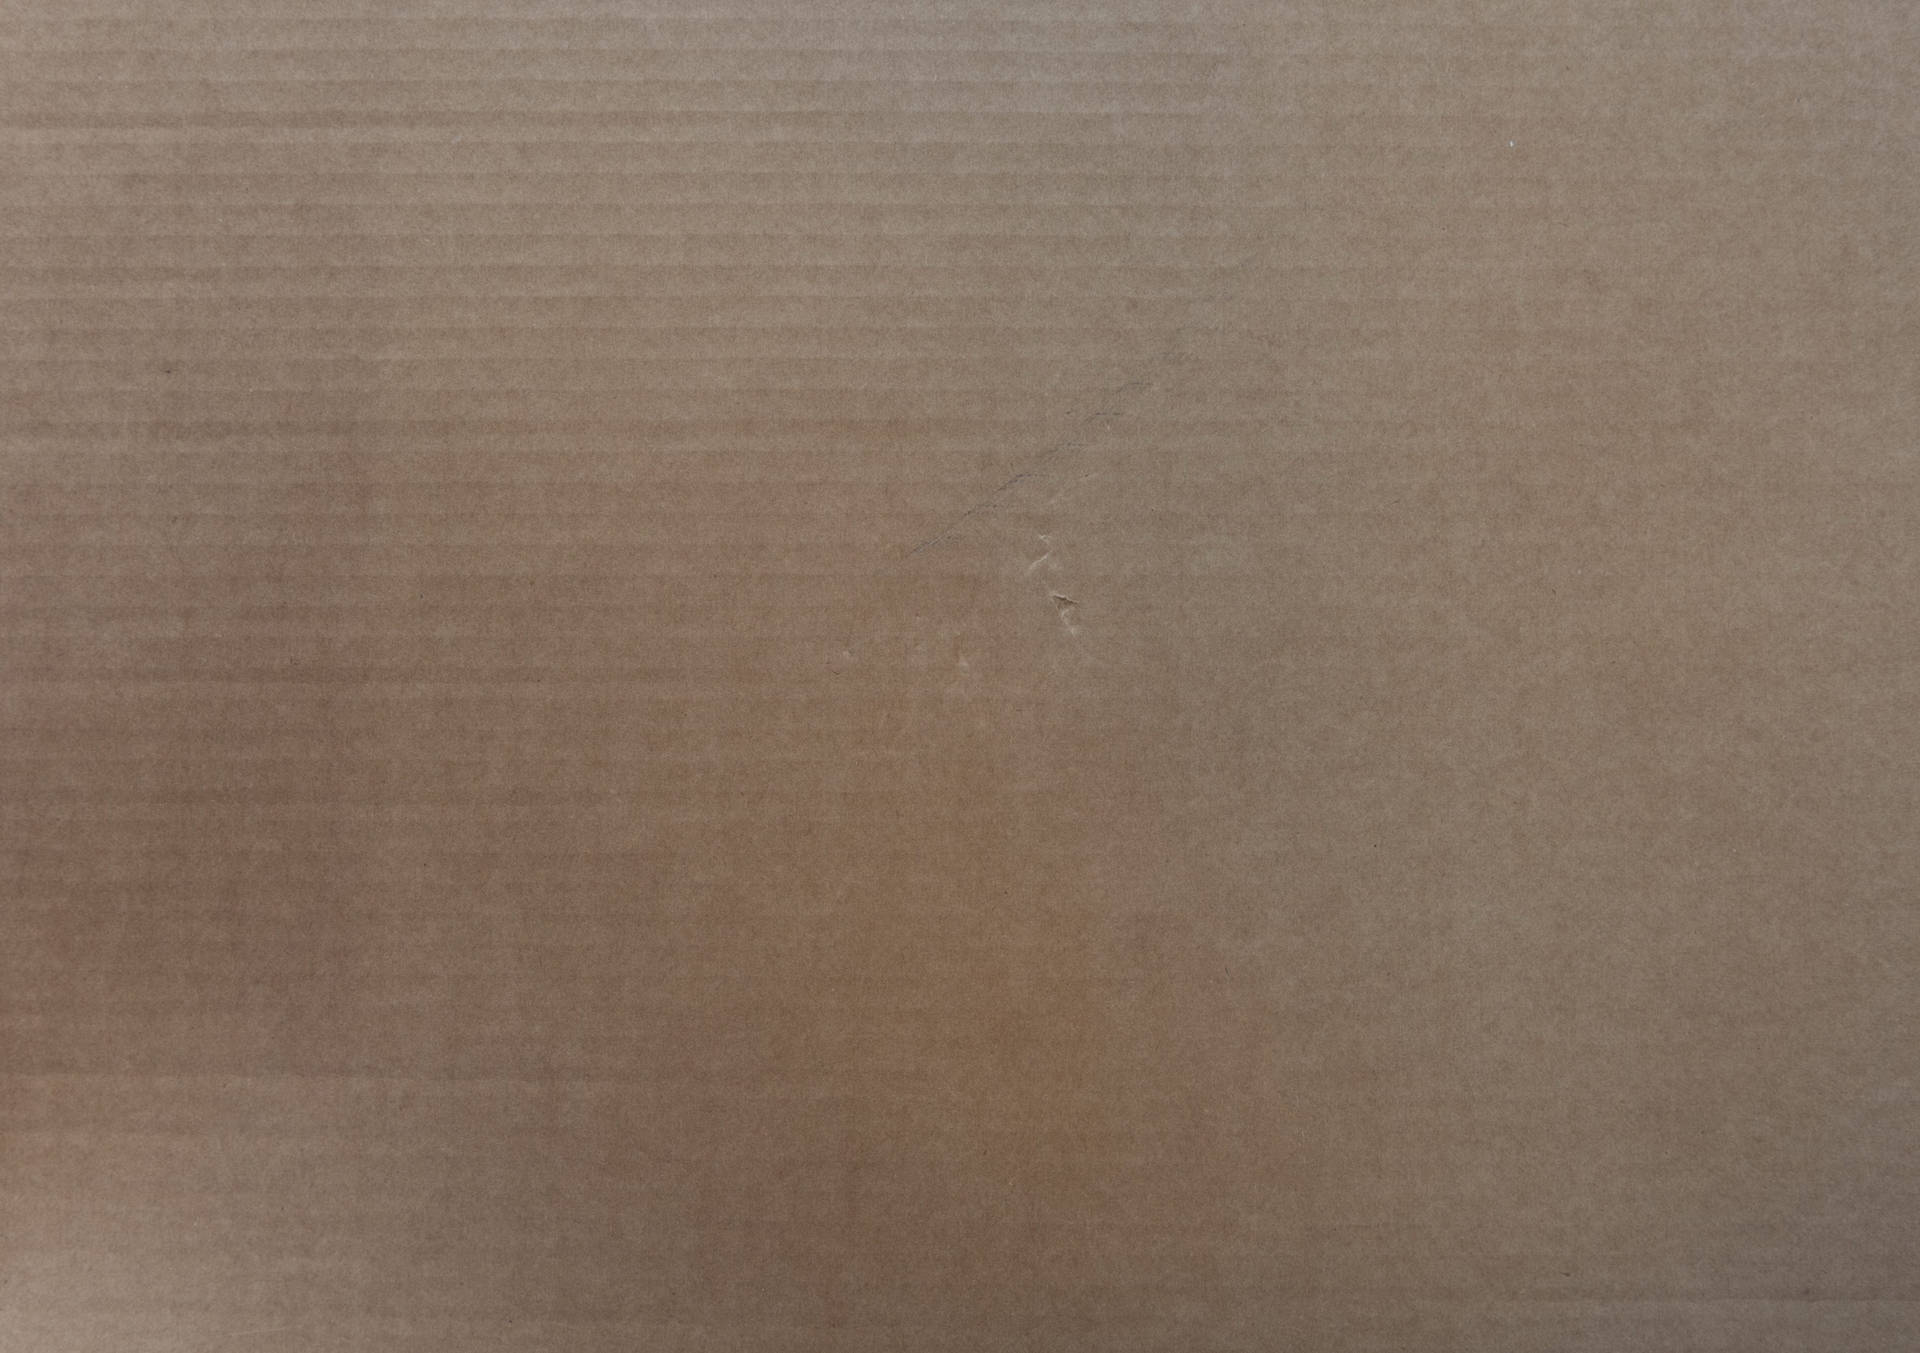 A Brown Cardboard Box With A Hole In It Background